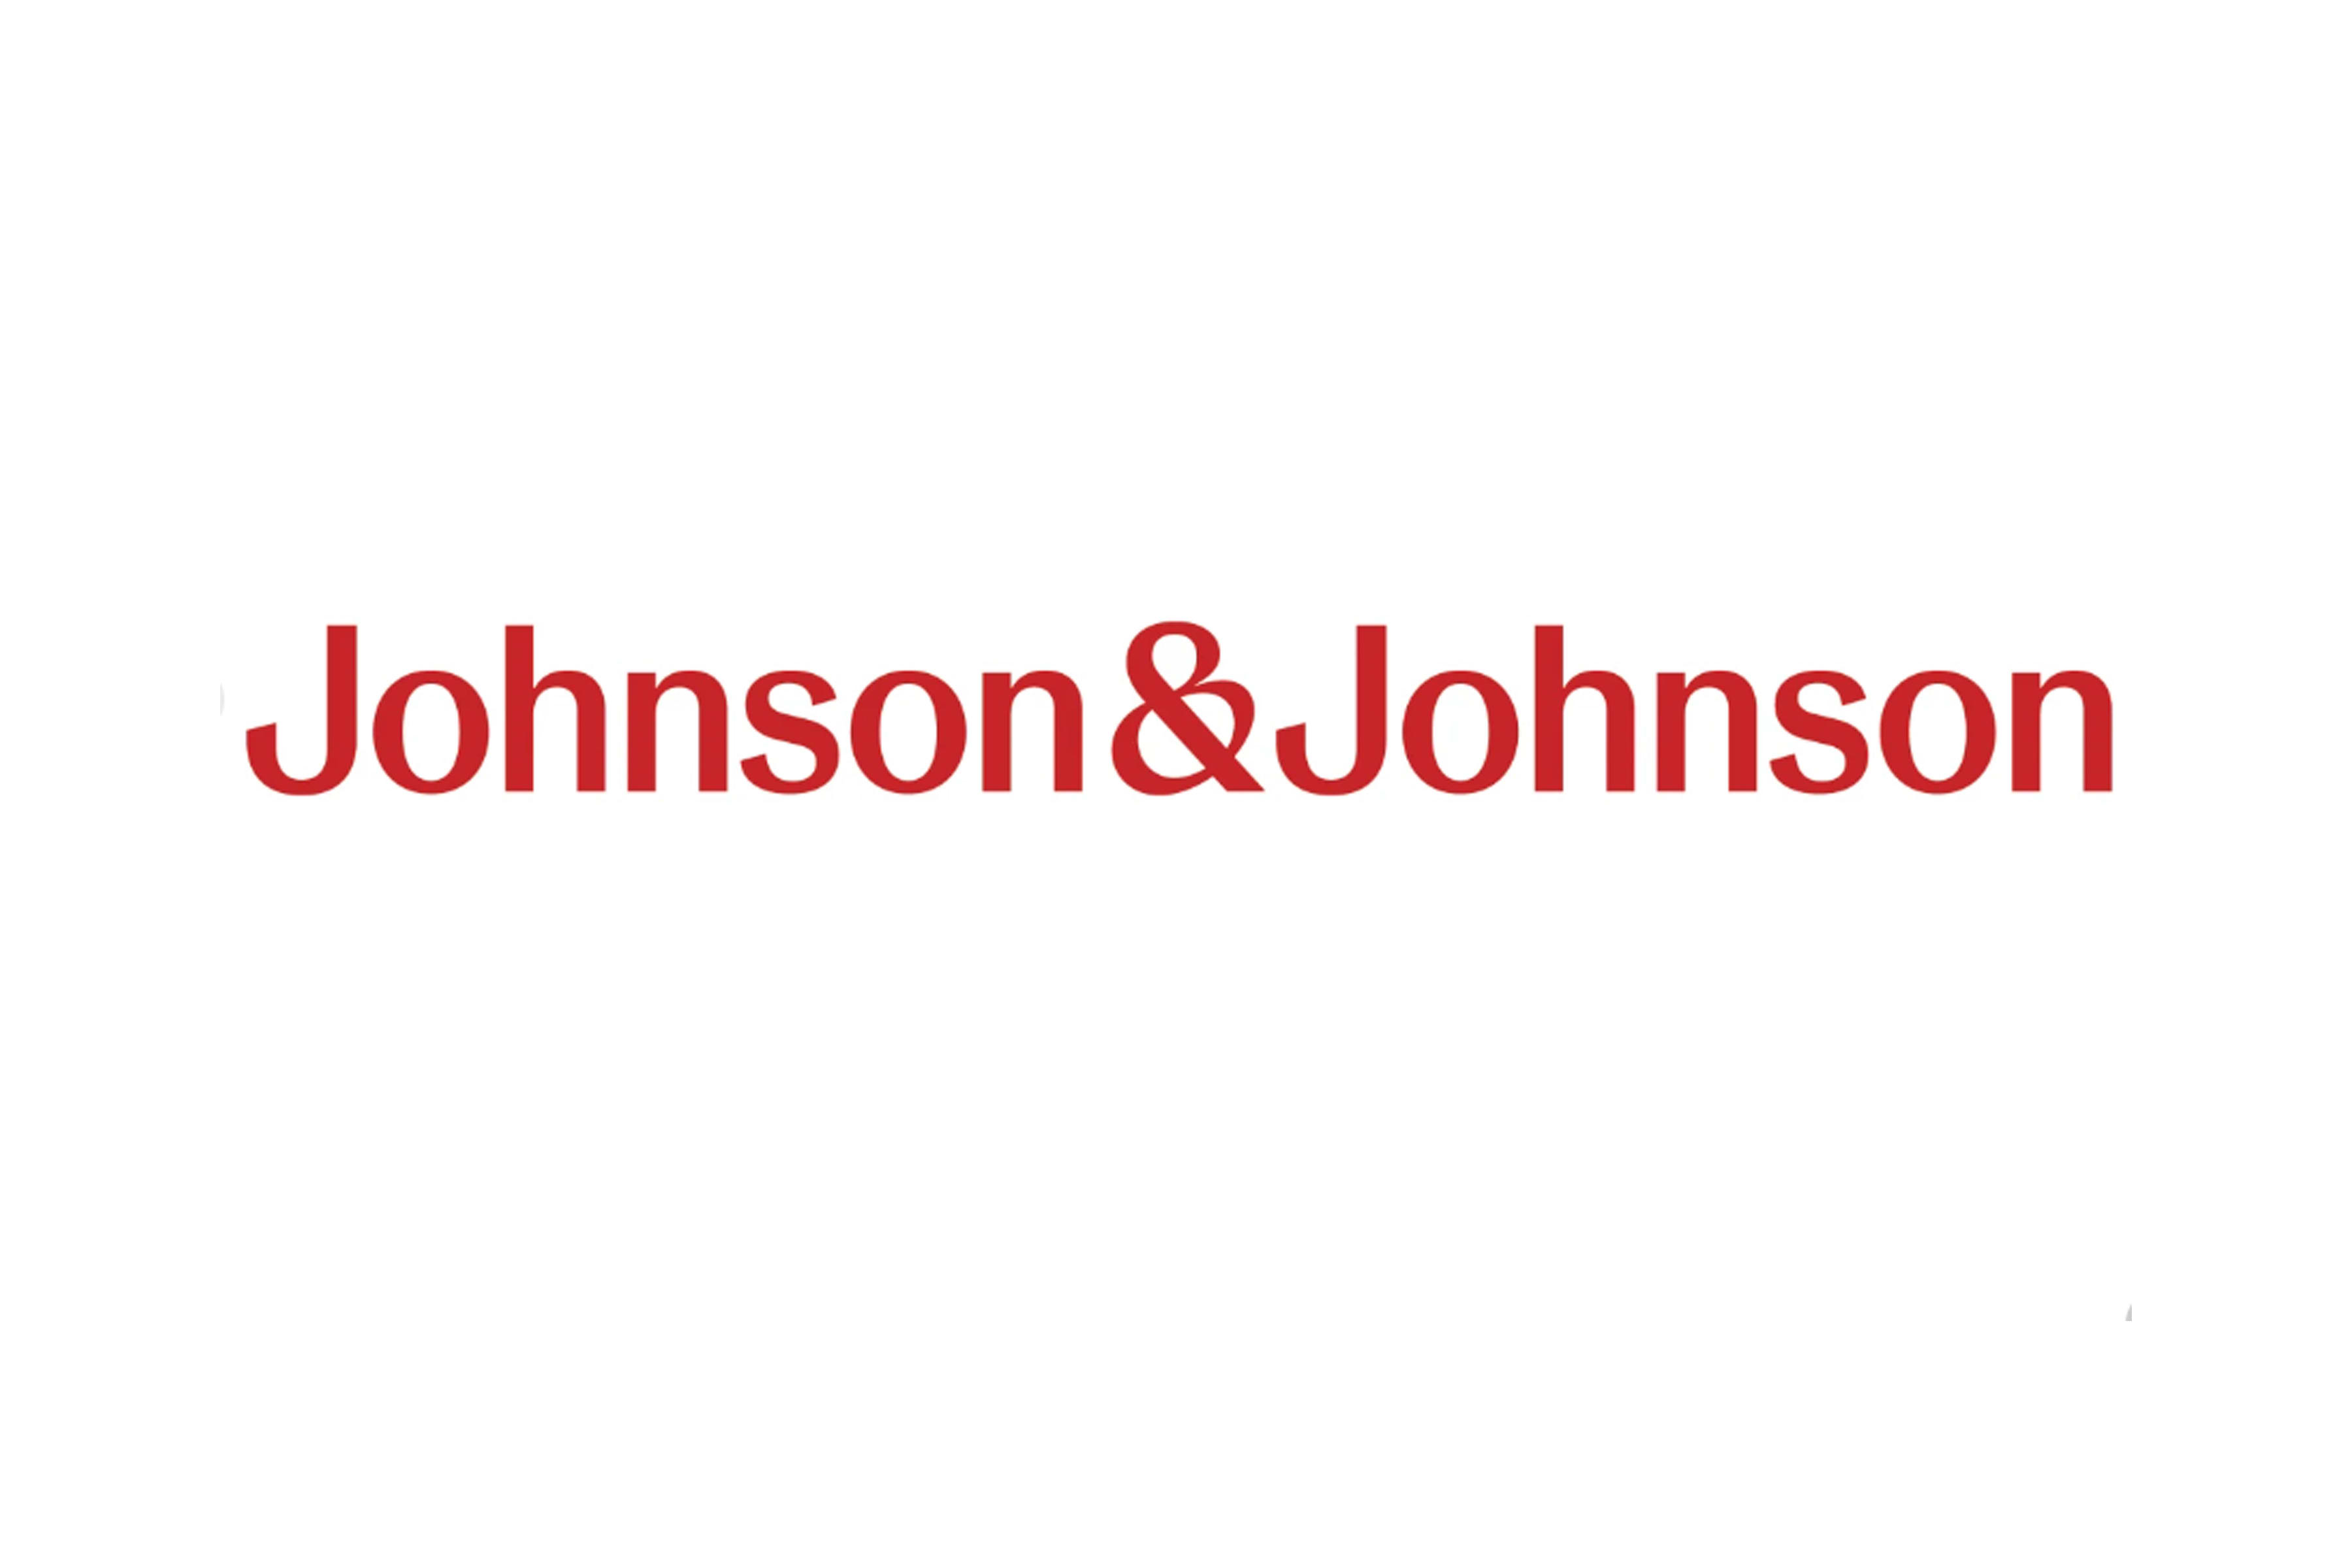 Johnson & Johnson has a new logo after more than 130 years